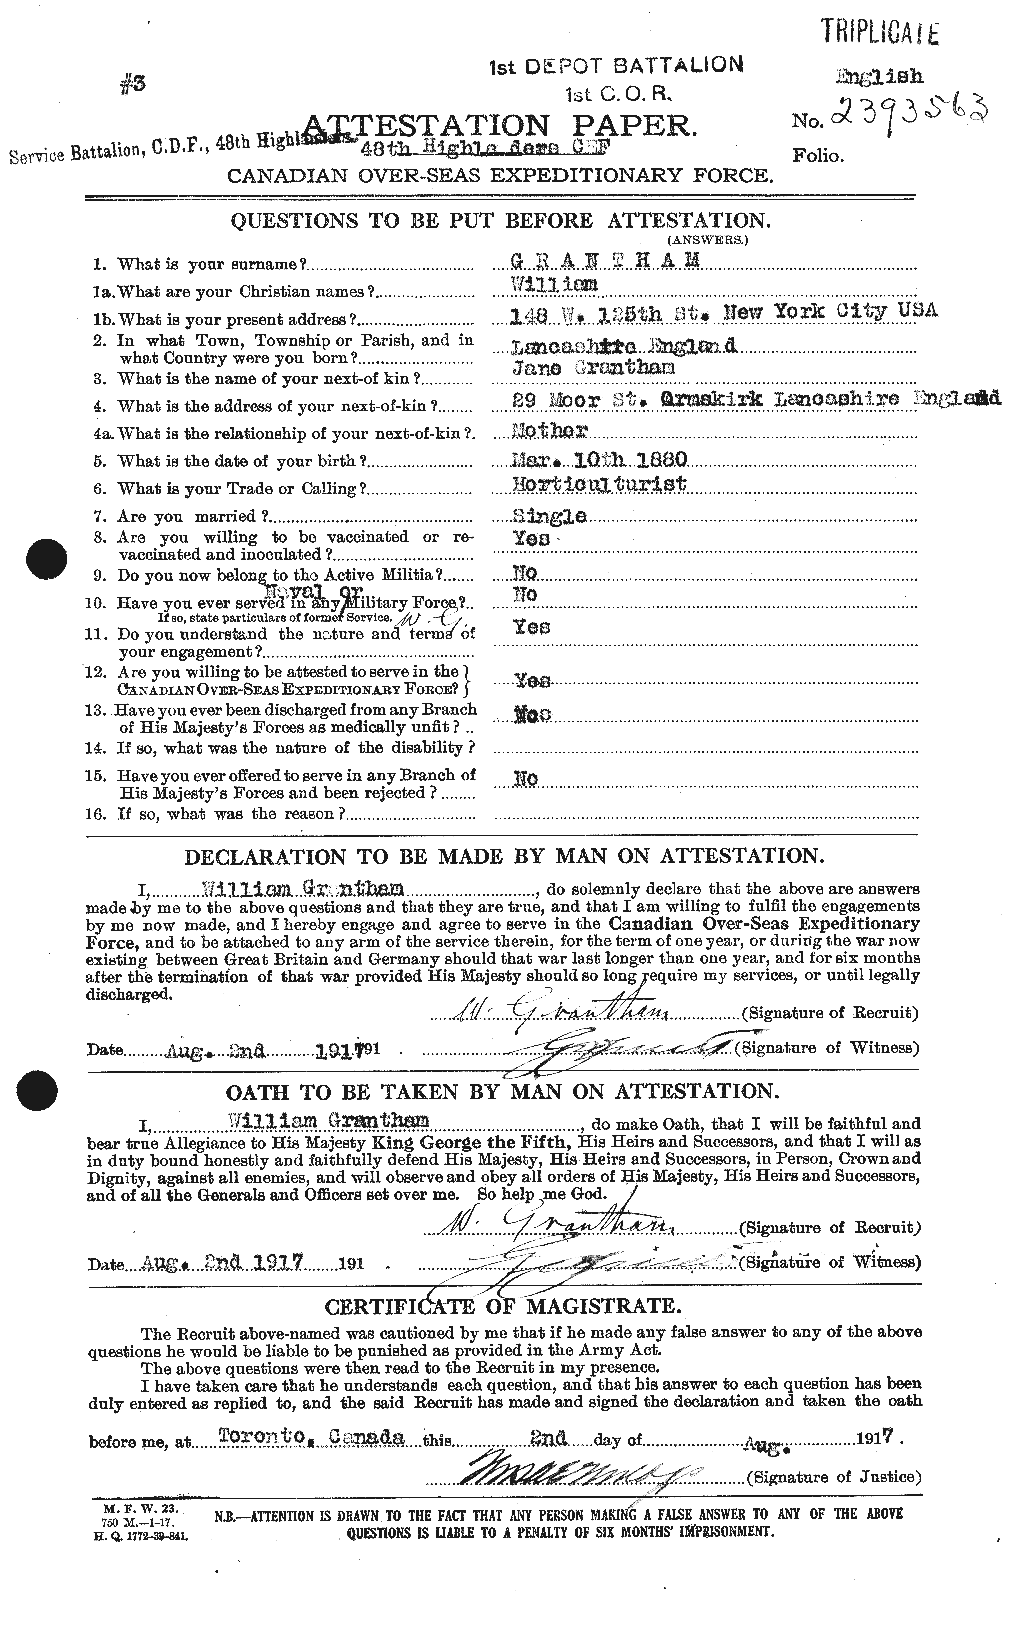 Personnel Records of the First World War - CEF 364419a